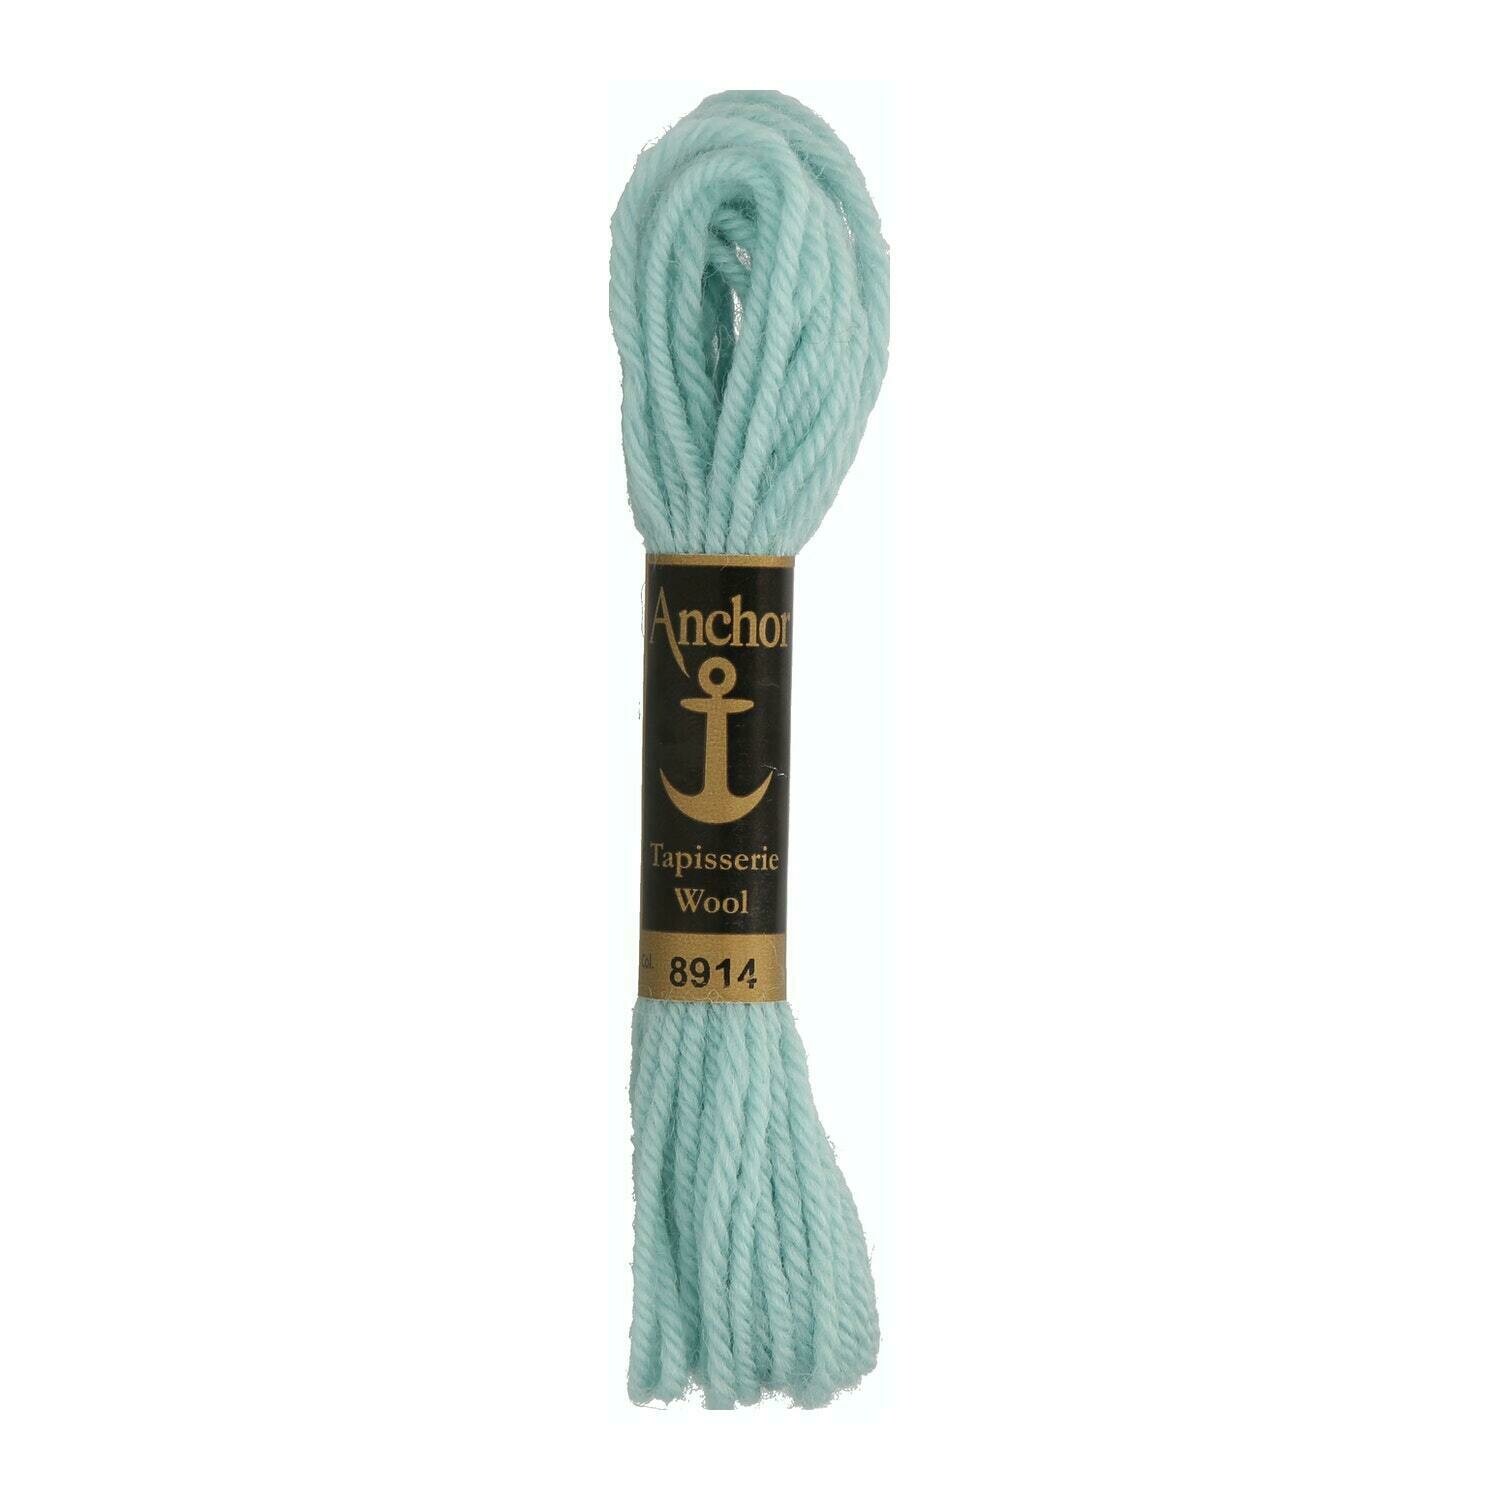 Anchor Tapisserie Wool #08982